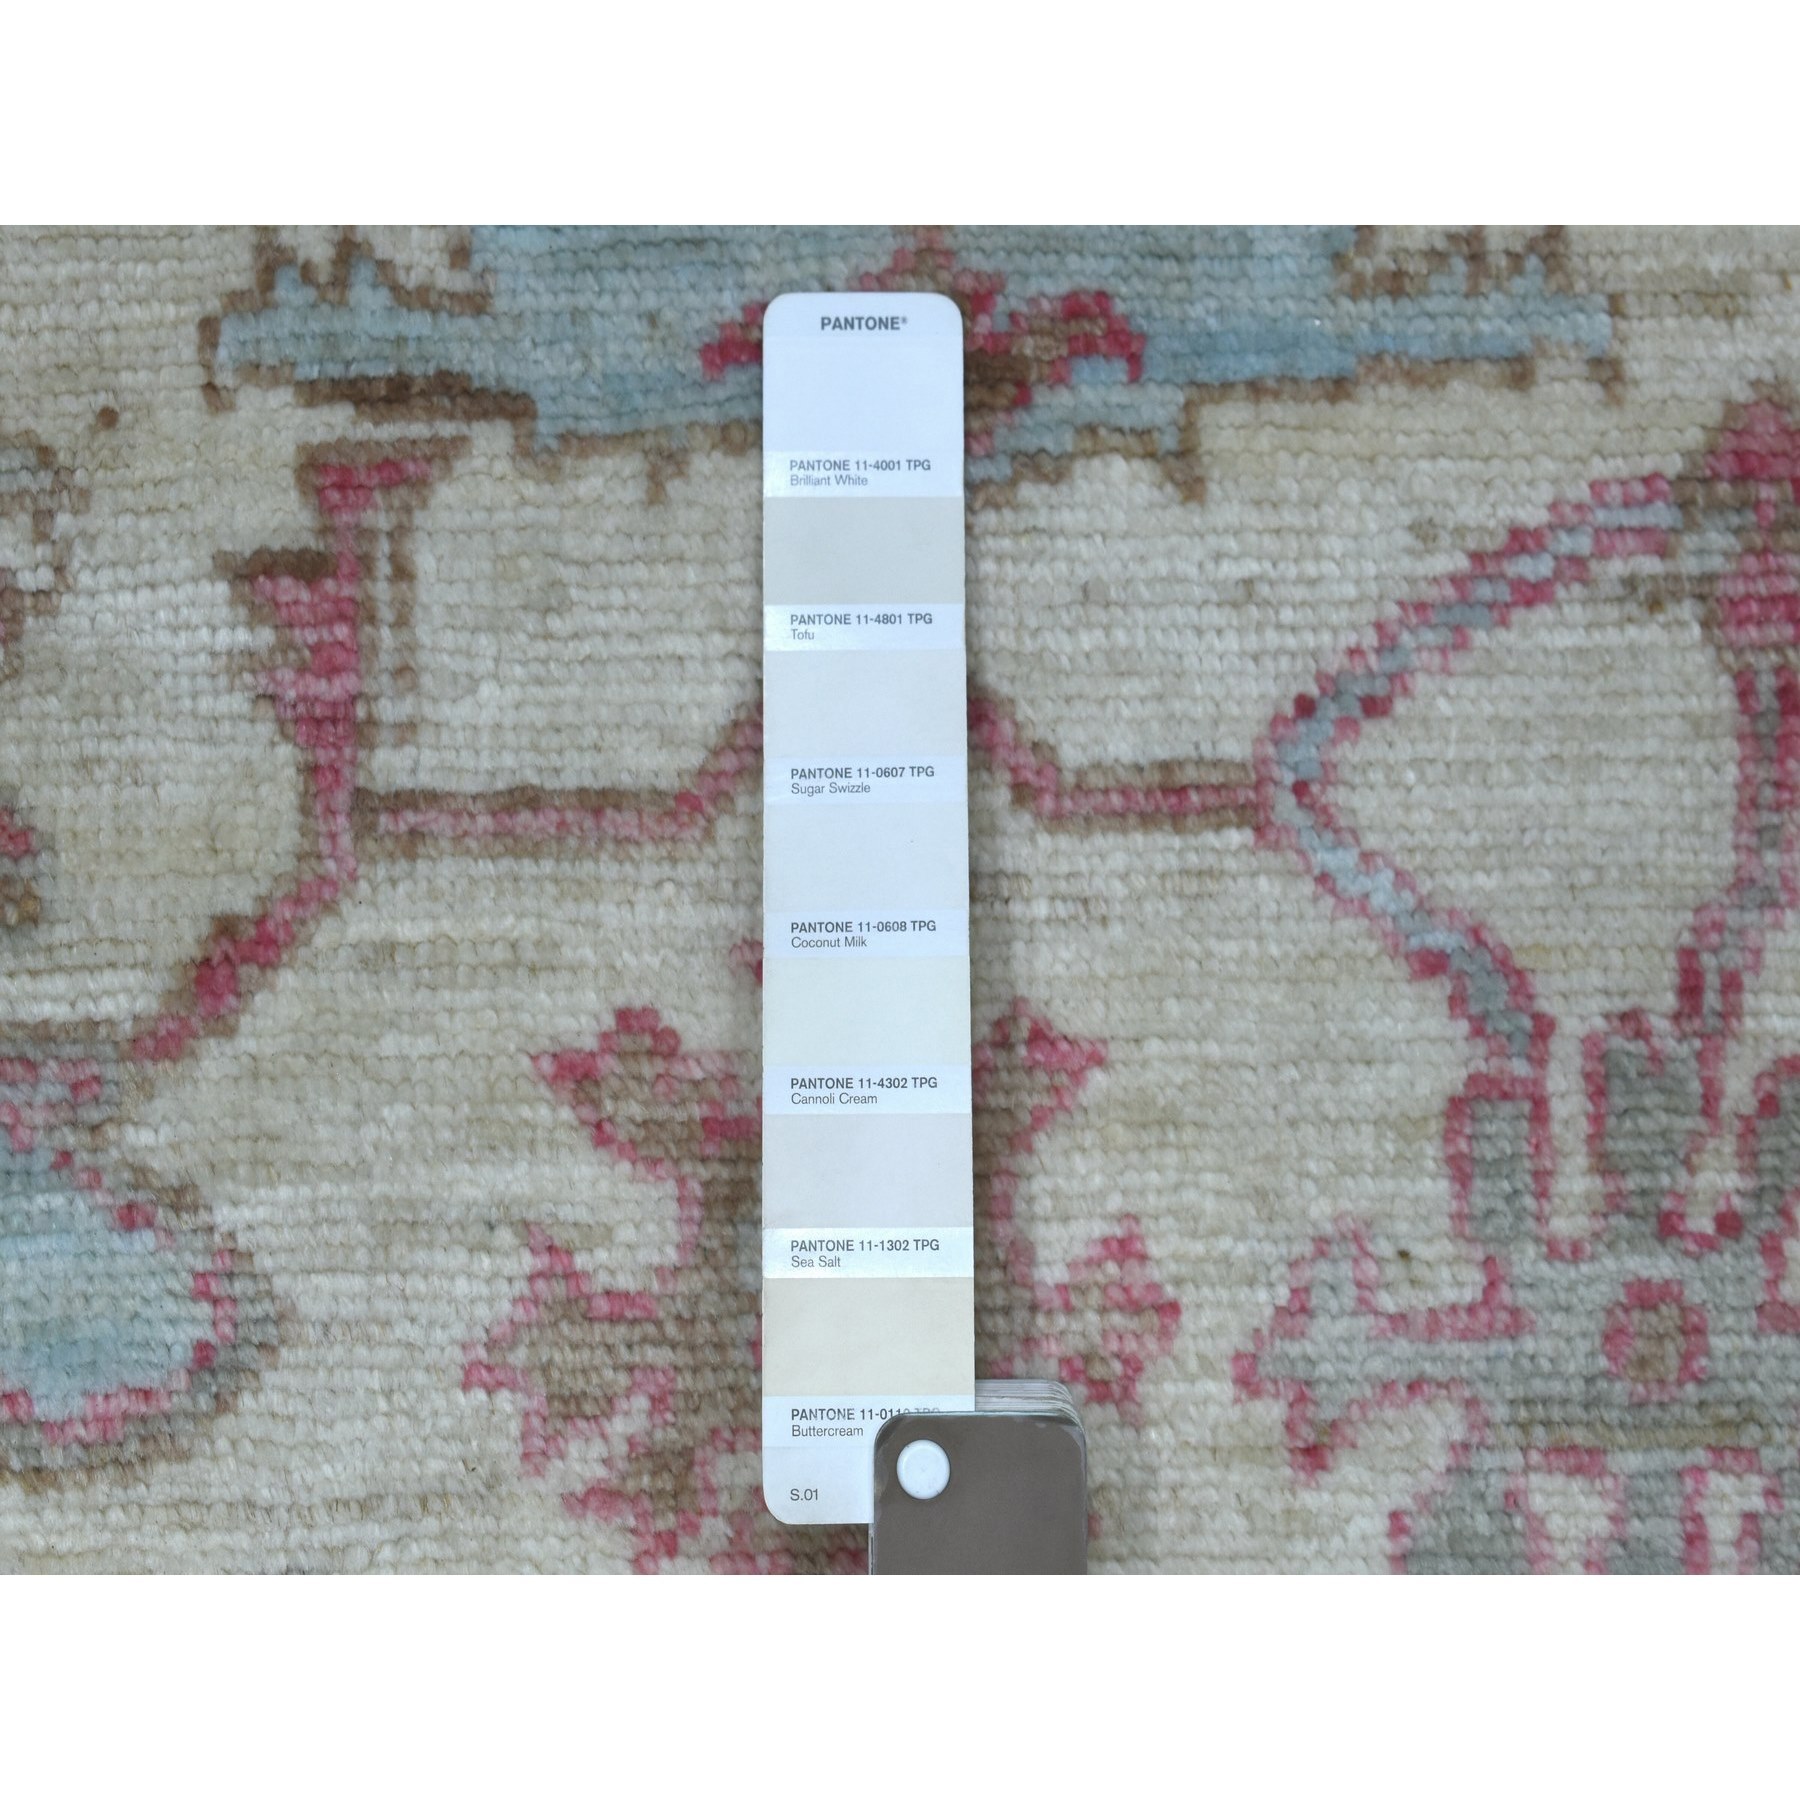 4'1"x5'10" Ivory Afghan Angora Oushak with Soft Colors Pure and Comfortable Wool Hand Woven Oriental Rug 